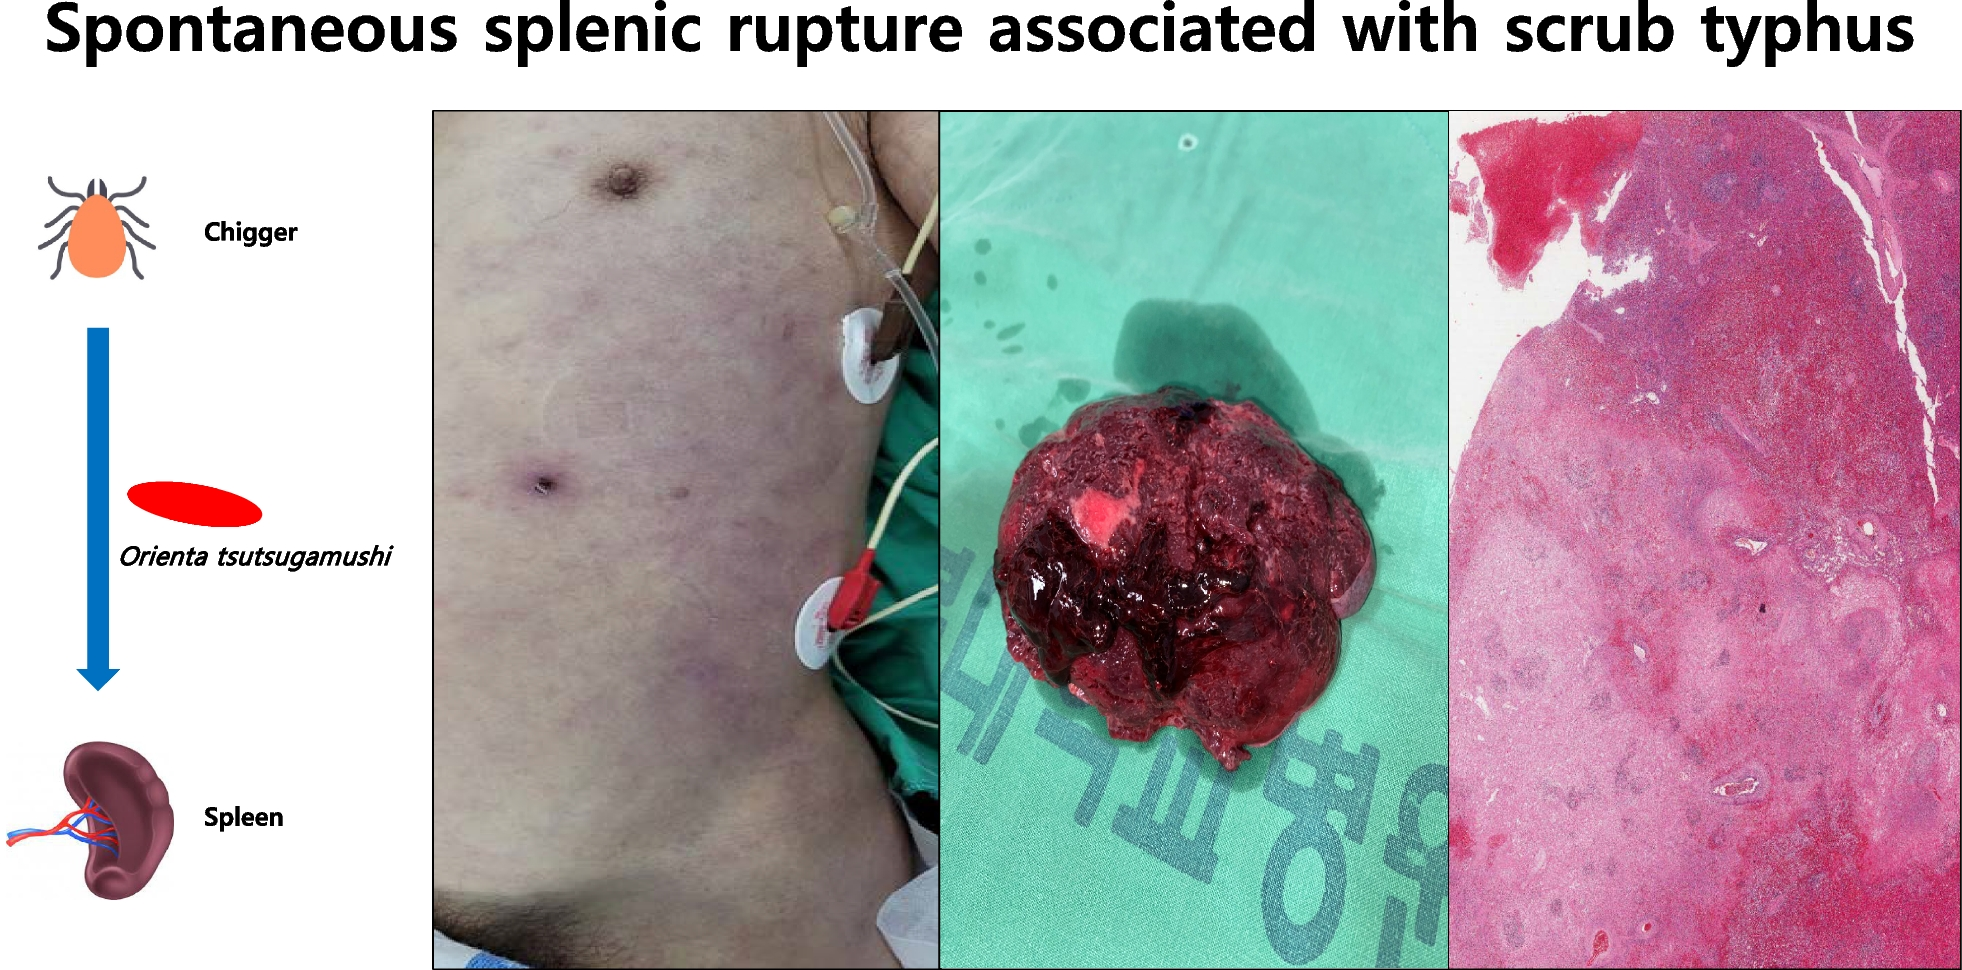 Spontaneous splenic rupture associated with scrub typhus: a case report